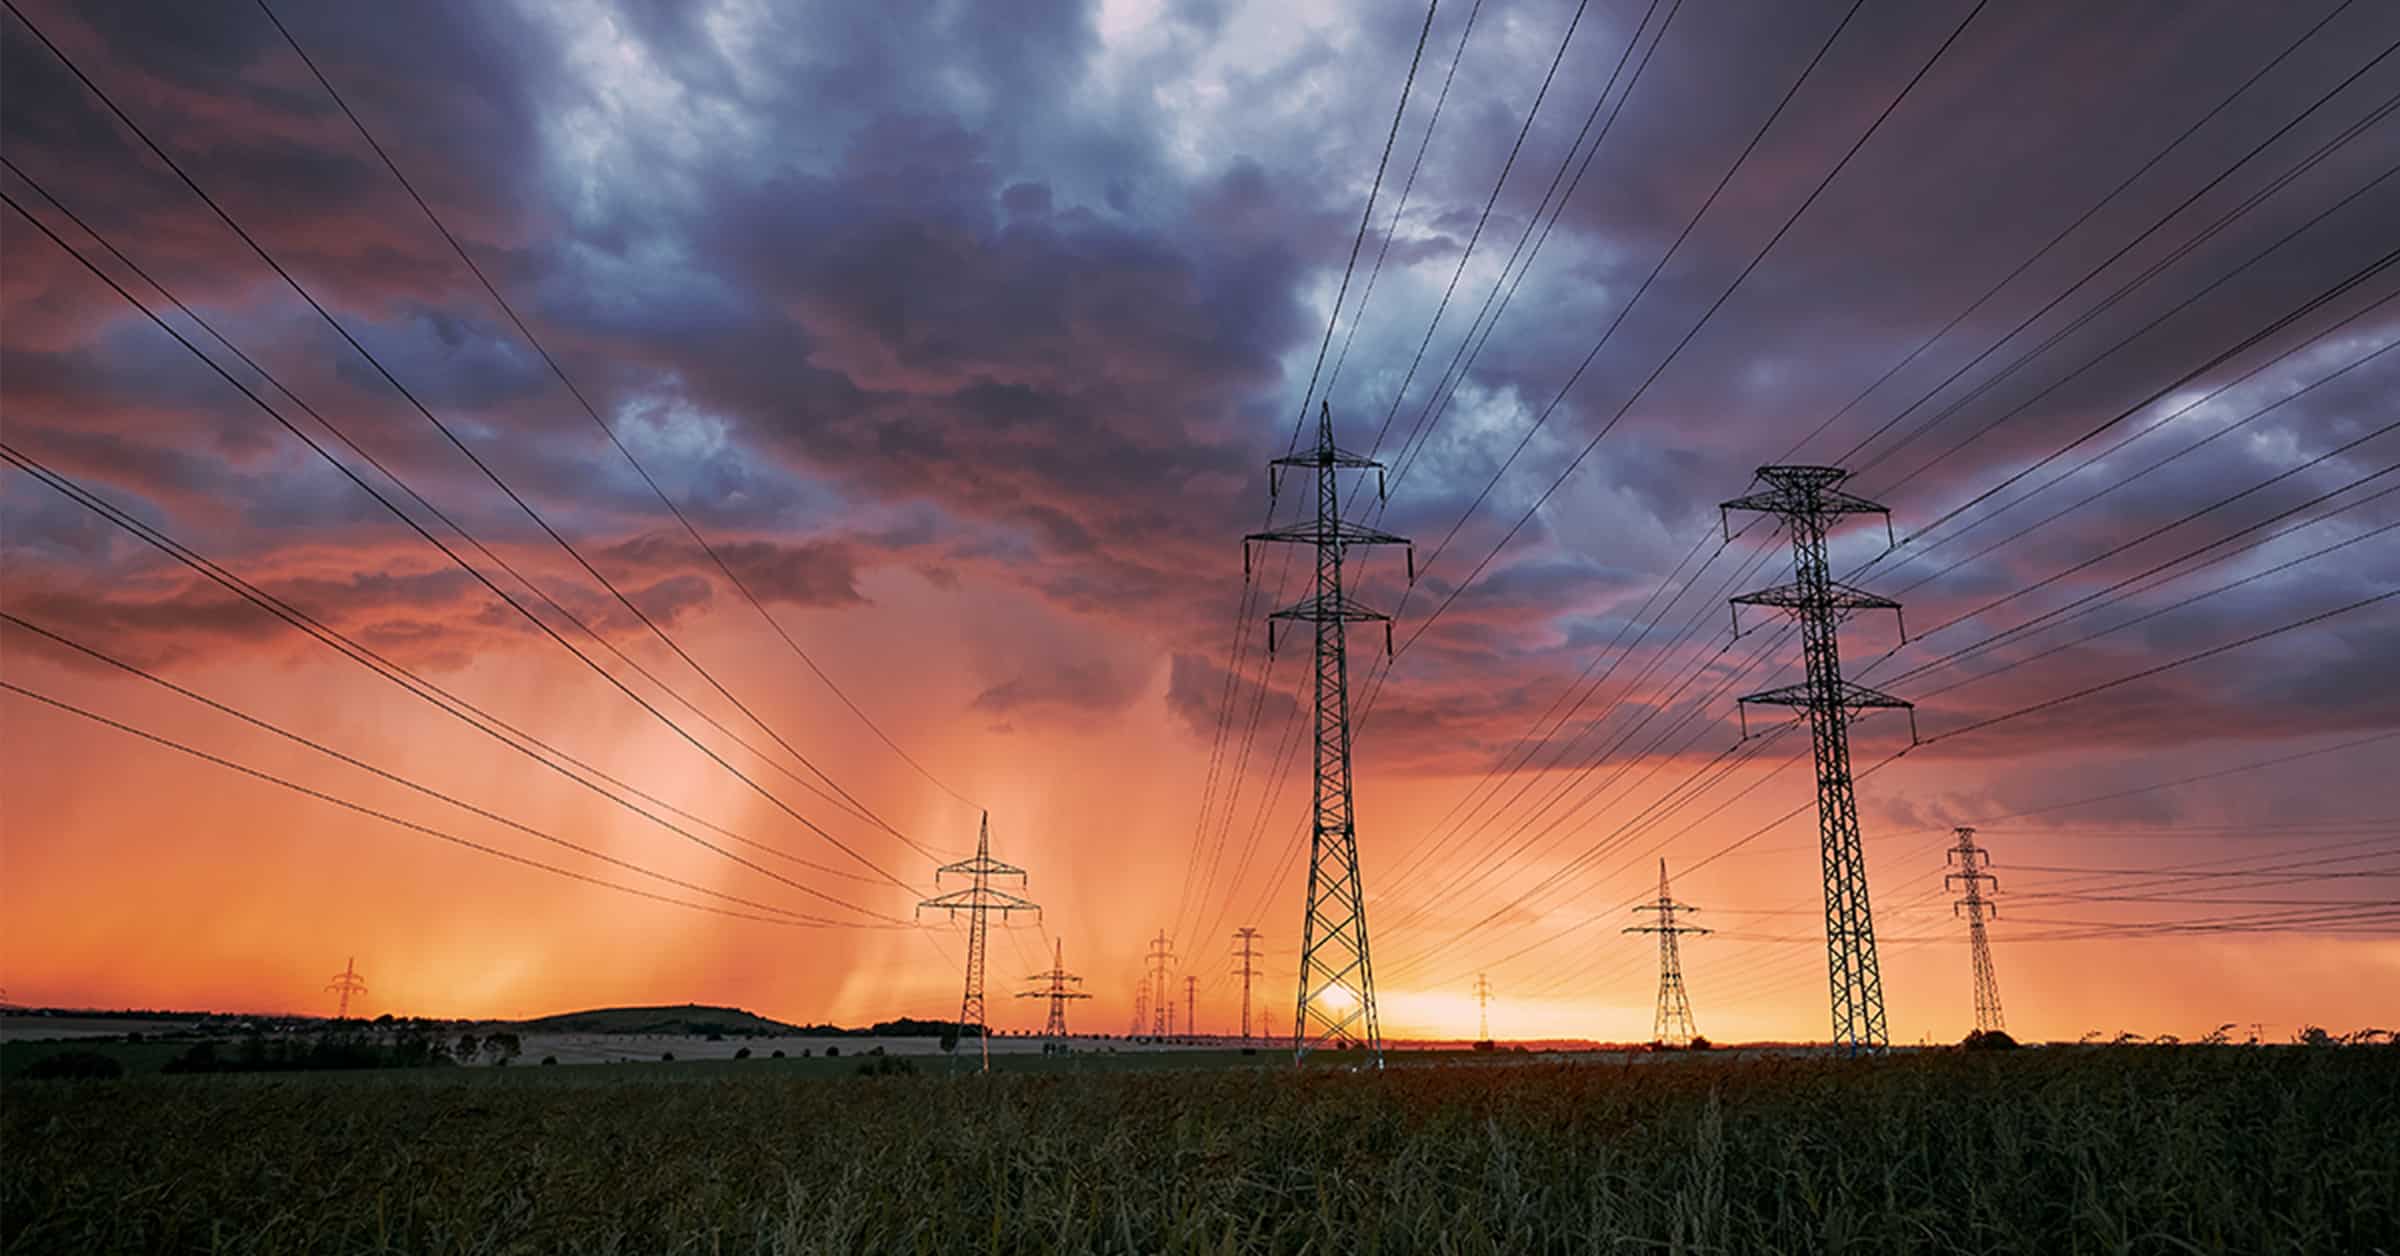 Photo of electricity towers under cloudy skies.